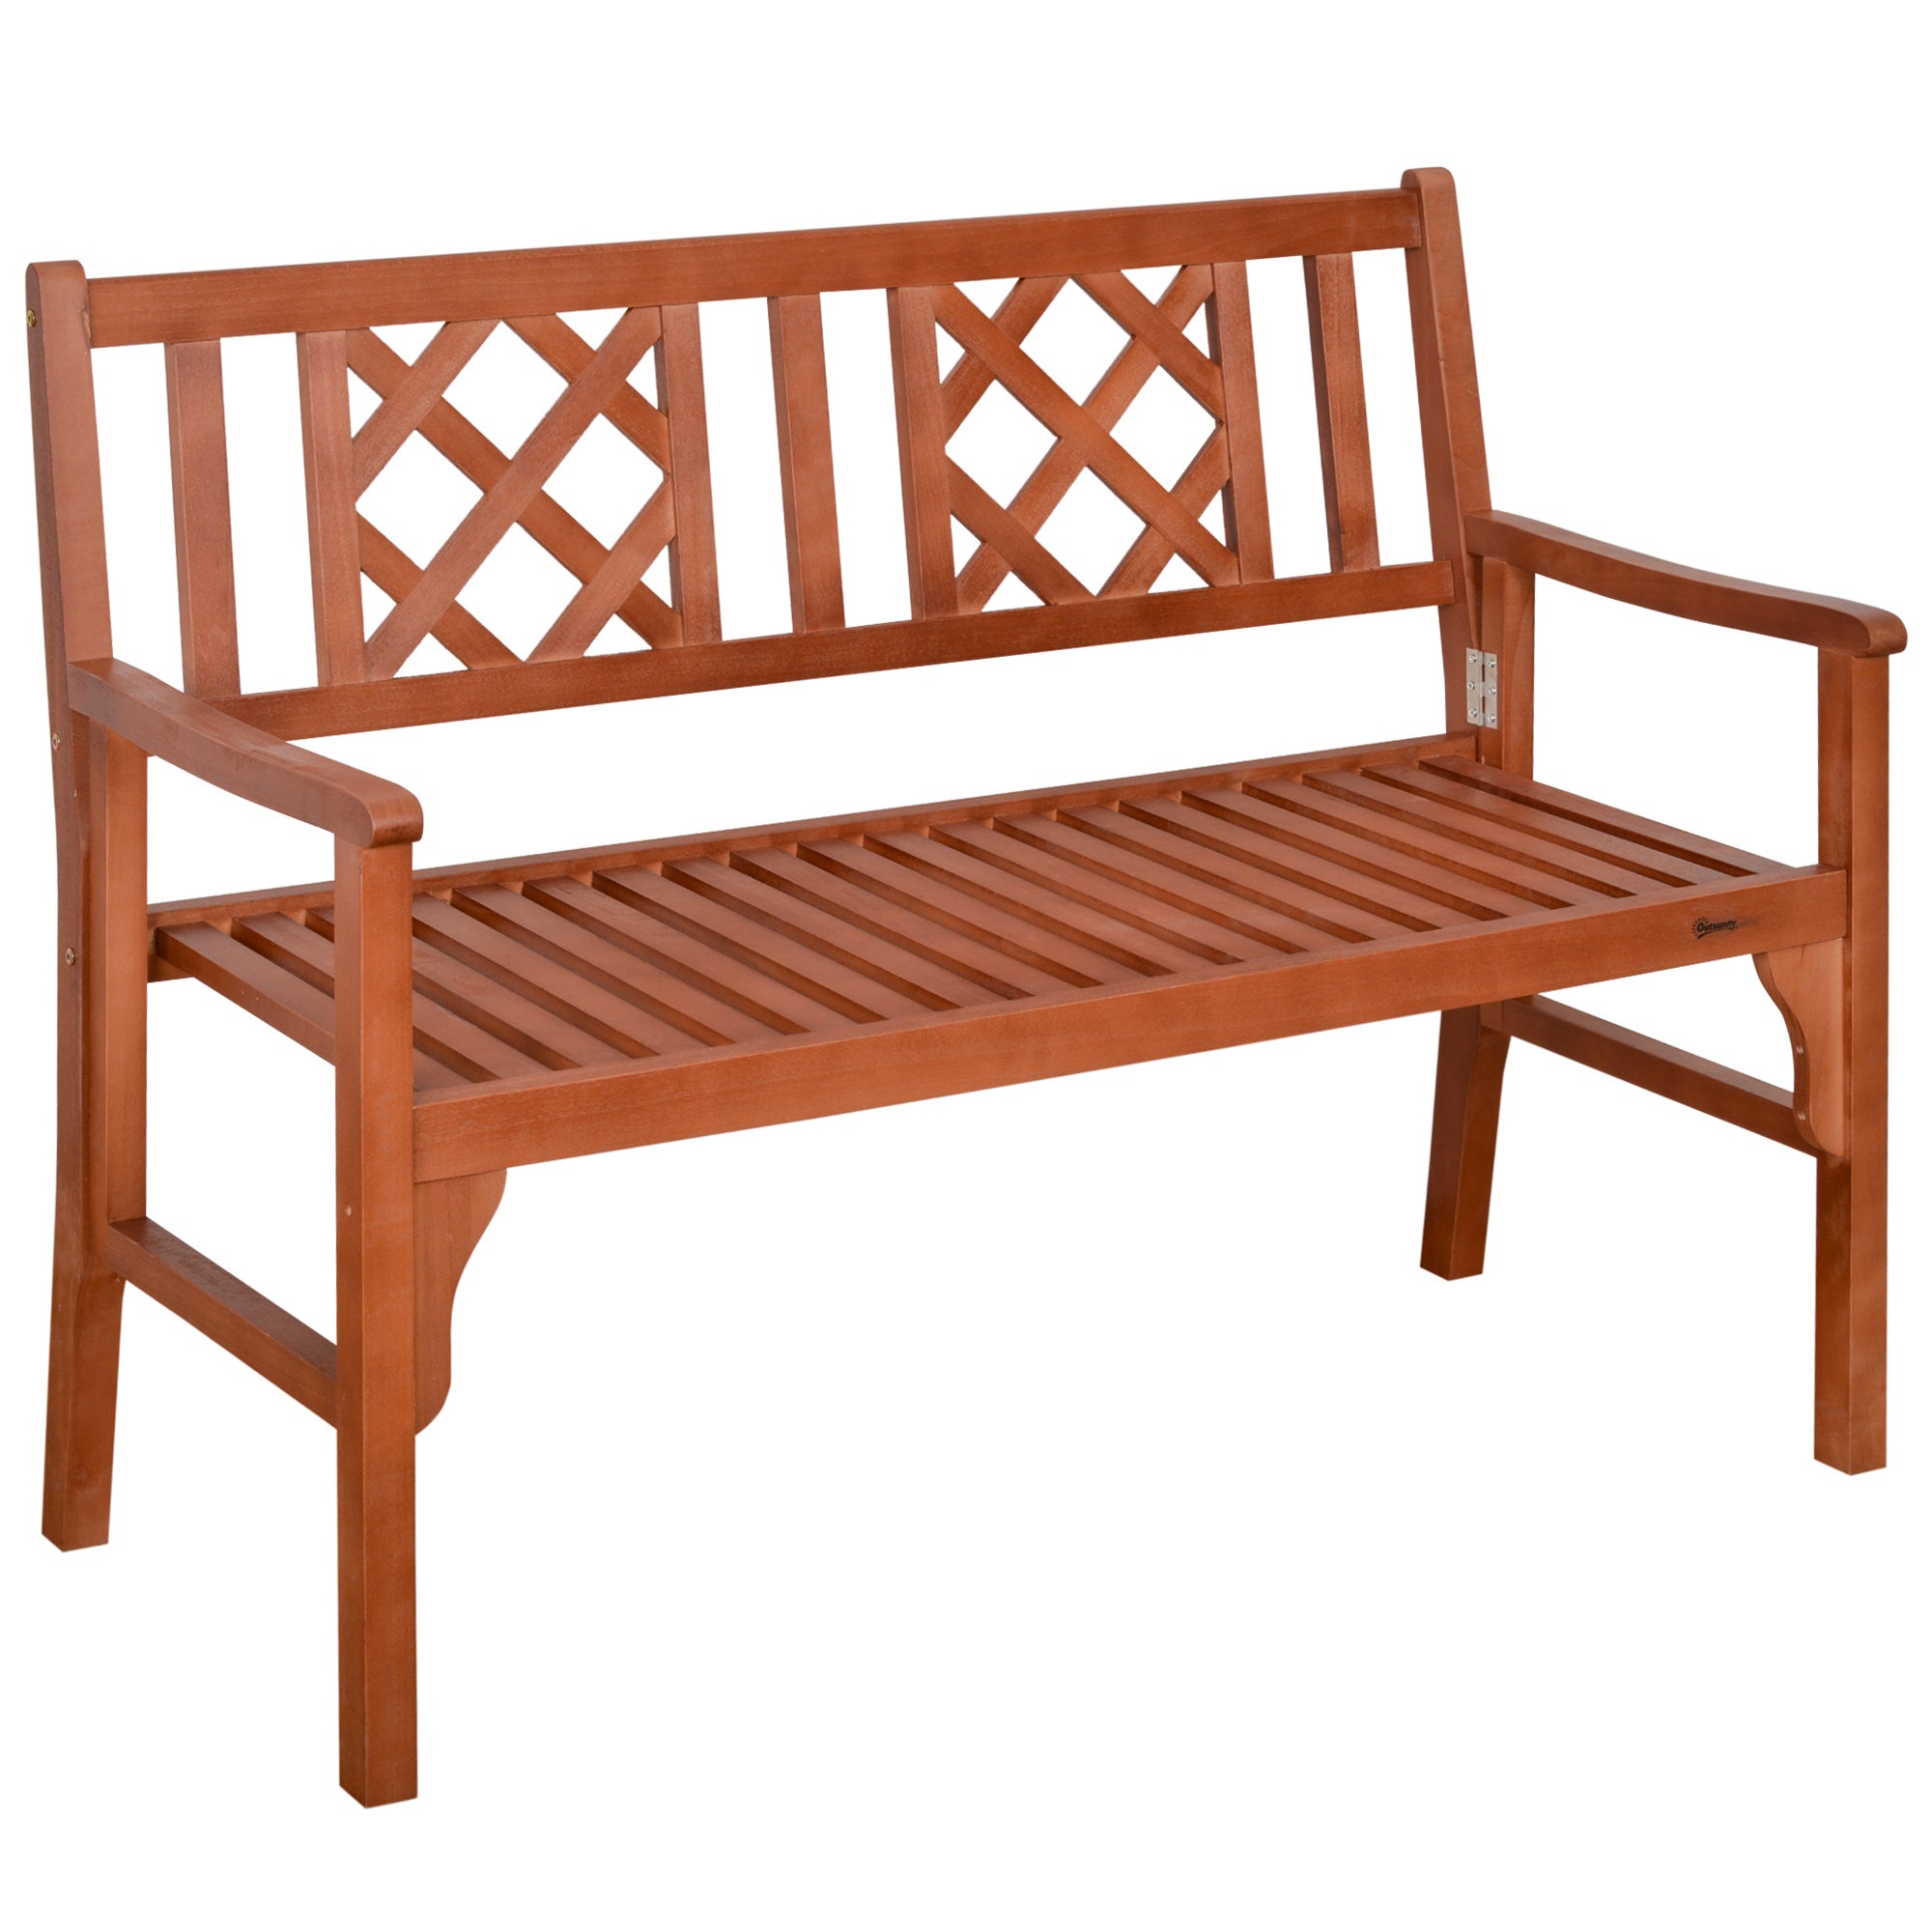 Outsunny Foldable Garden Bench - 2-Seater Patio Wooden Bench w/ Backrest Brown  | TJ Hughes